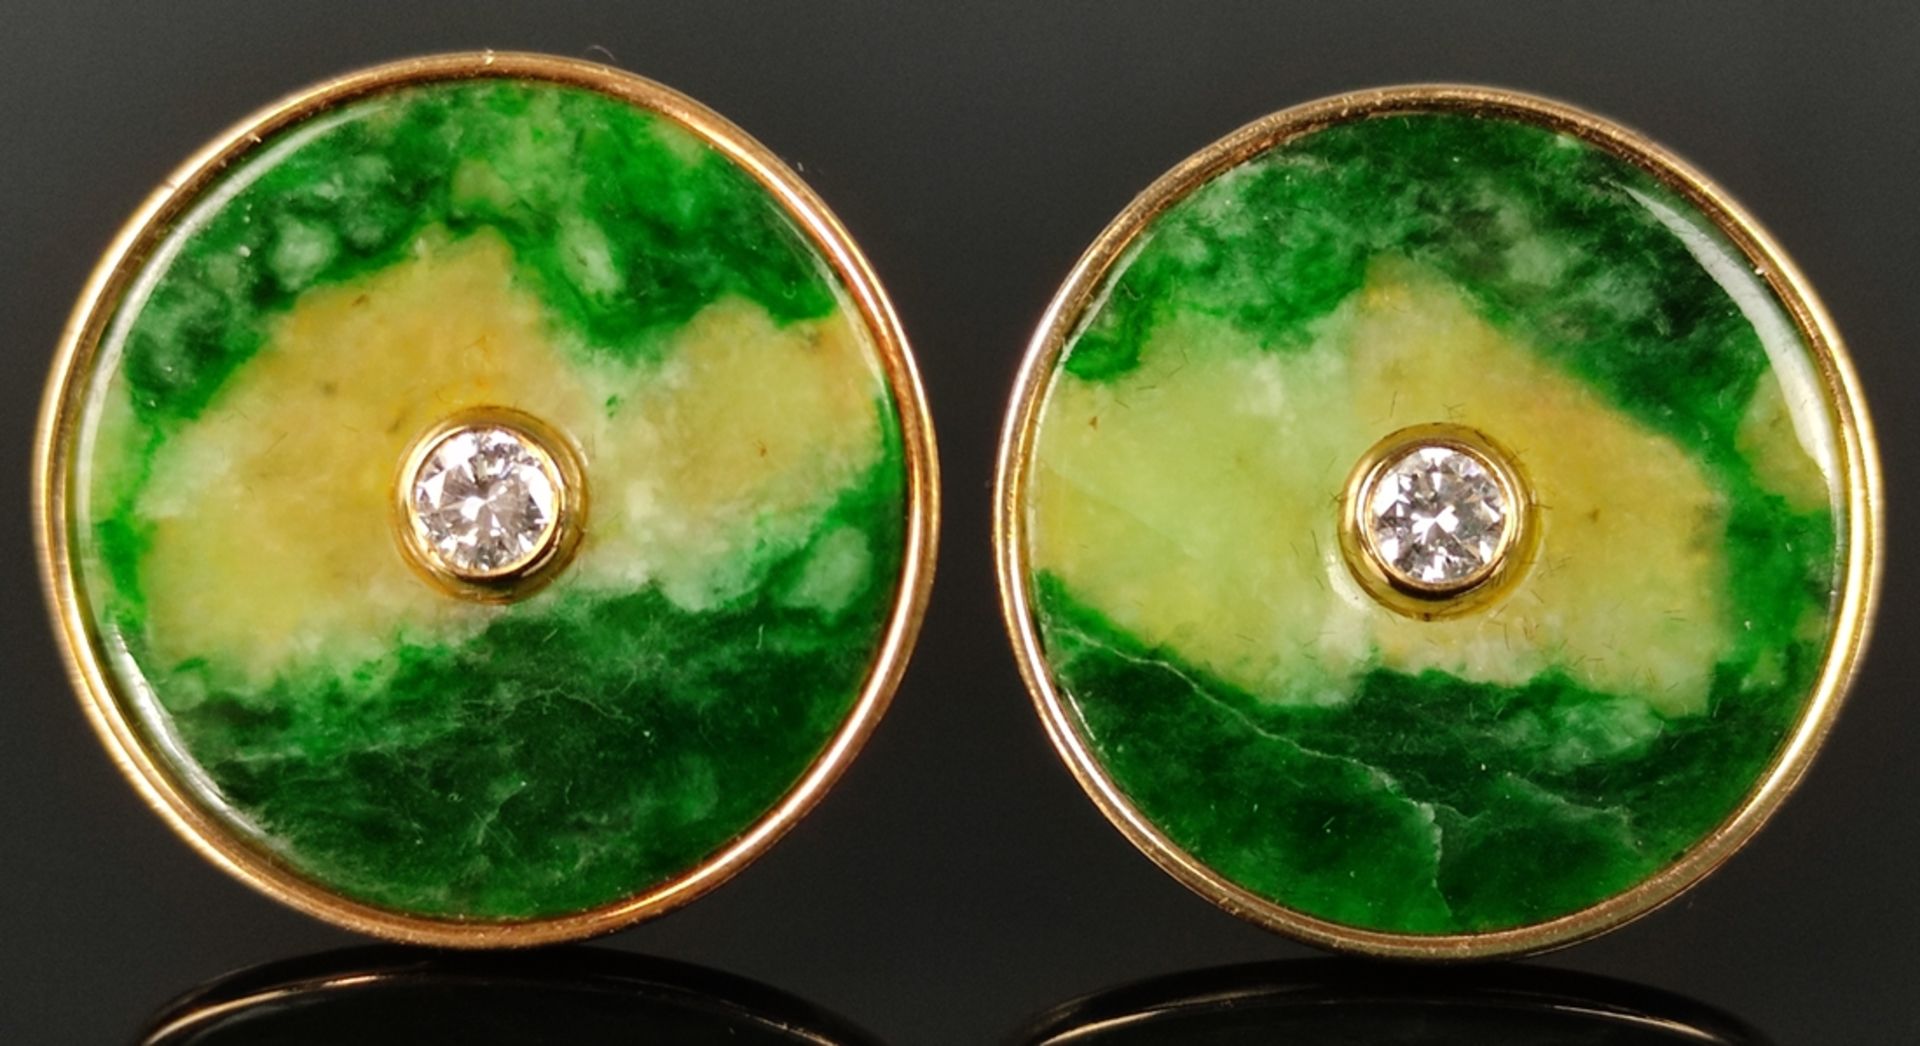 Pair of earrings, discs of jadeite, each centered with a brilliant-cut diamond, together around 0.4